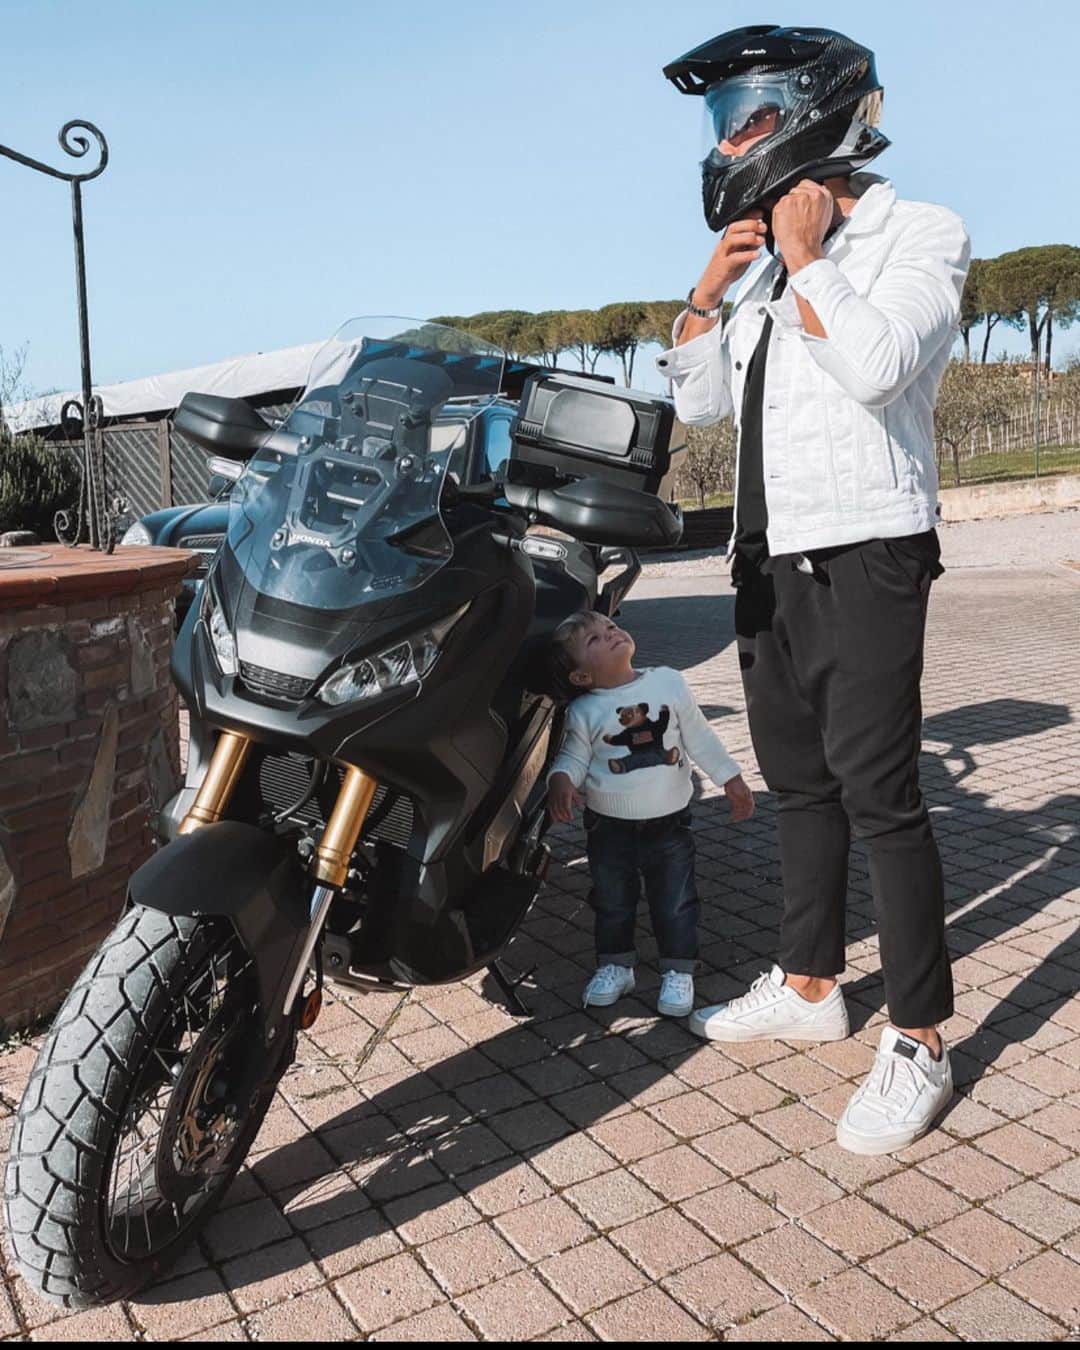 Mariano Di Vaioのインスタグラム：「Same day different wheels but same mood 😎 with the @airohelmet_official super cool helmets #Commander full carbon and #Aviator3 ! #onelove #twowheels #subdays」